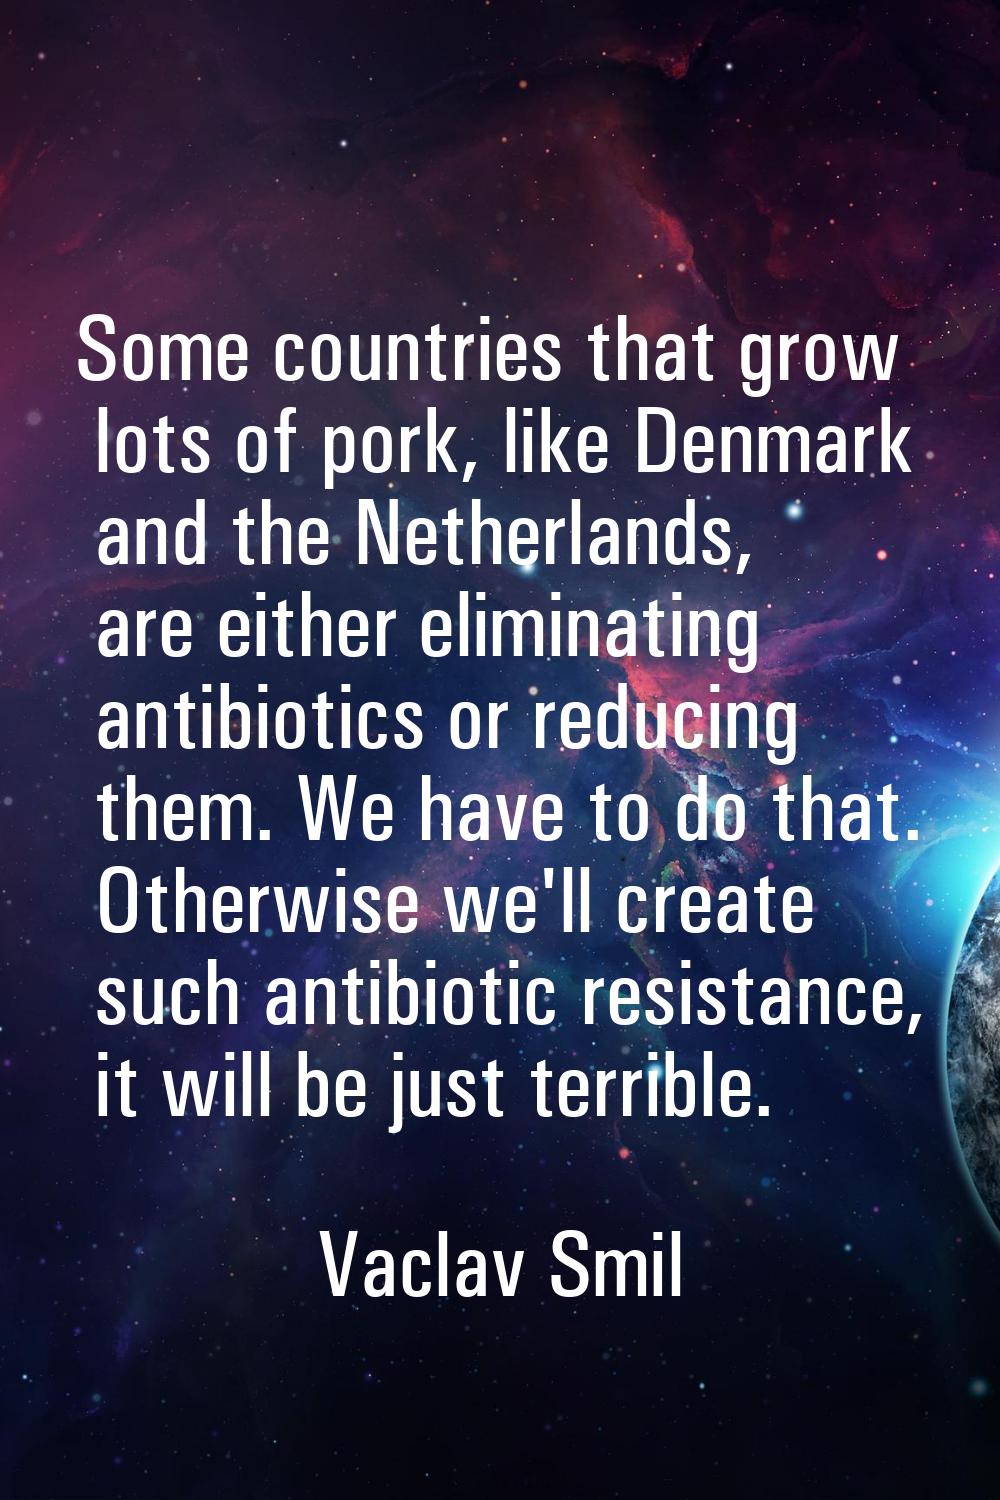 Some countries that grow lots of pork, like Denmark and the Netherlands, are either eliminating ant